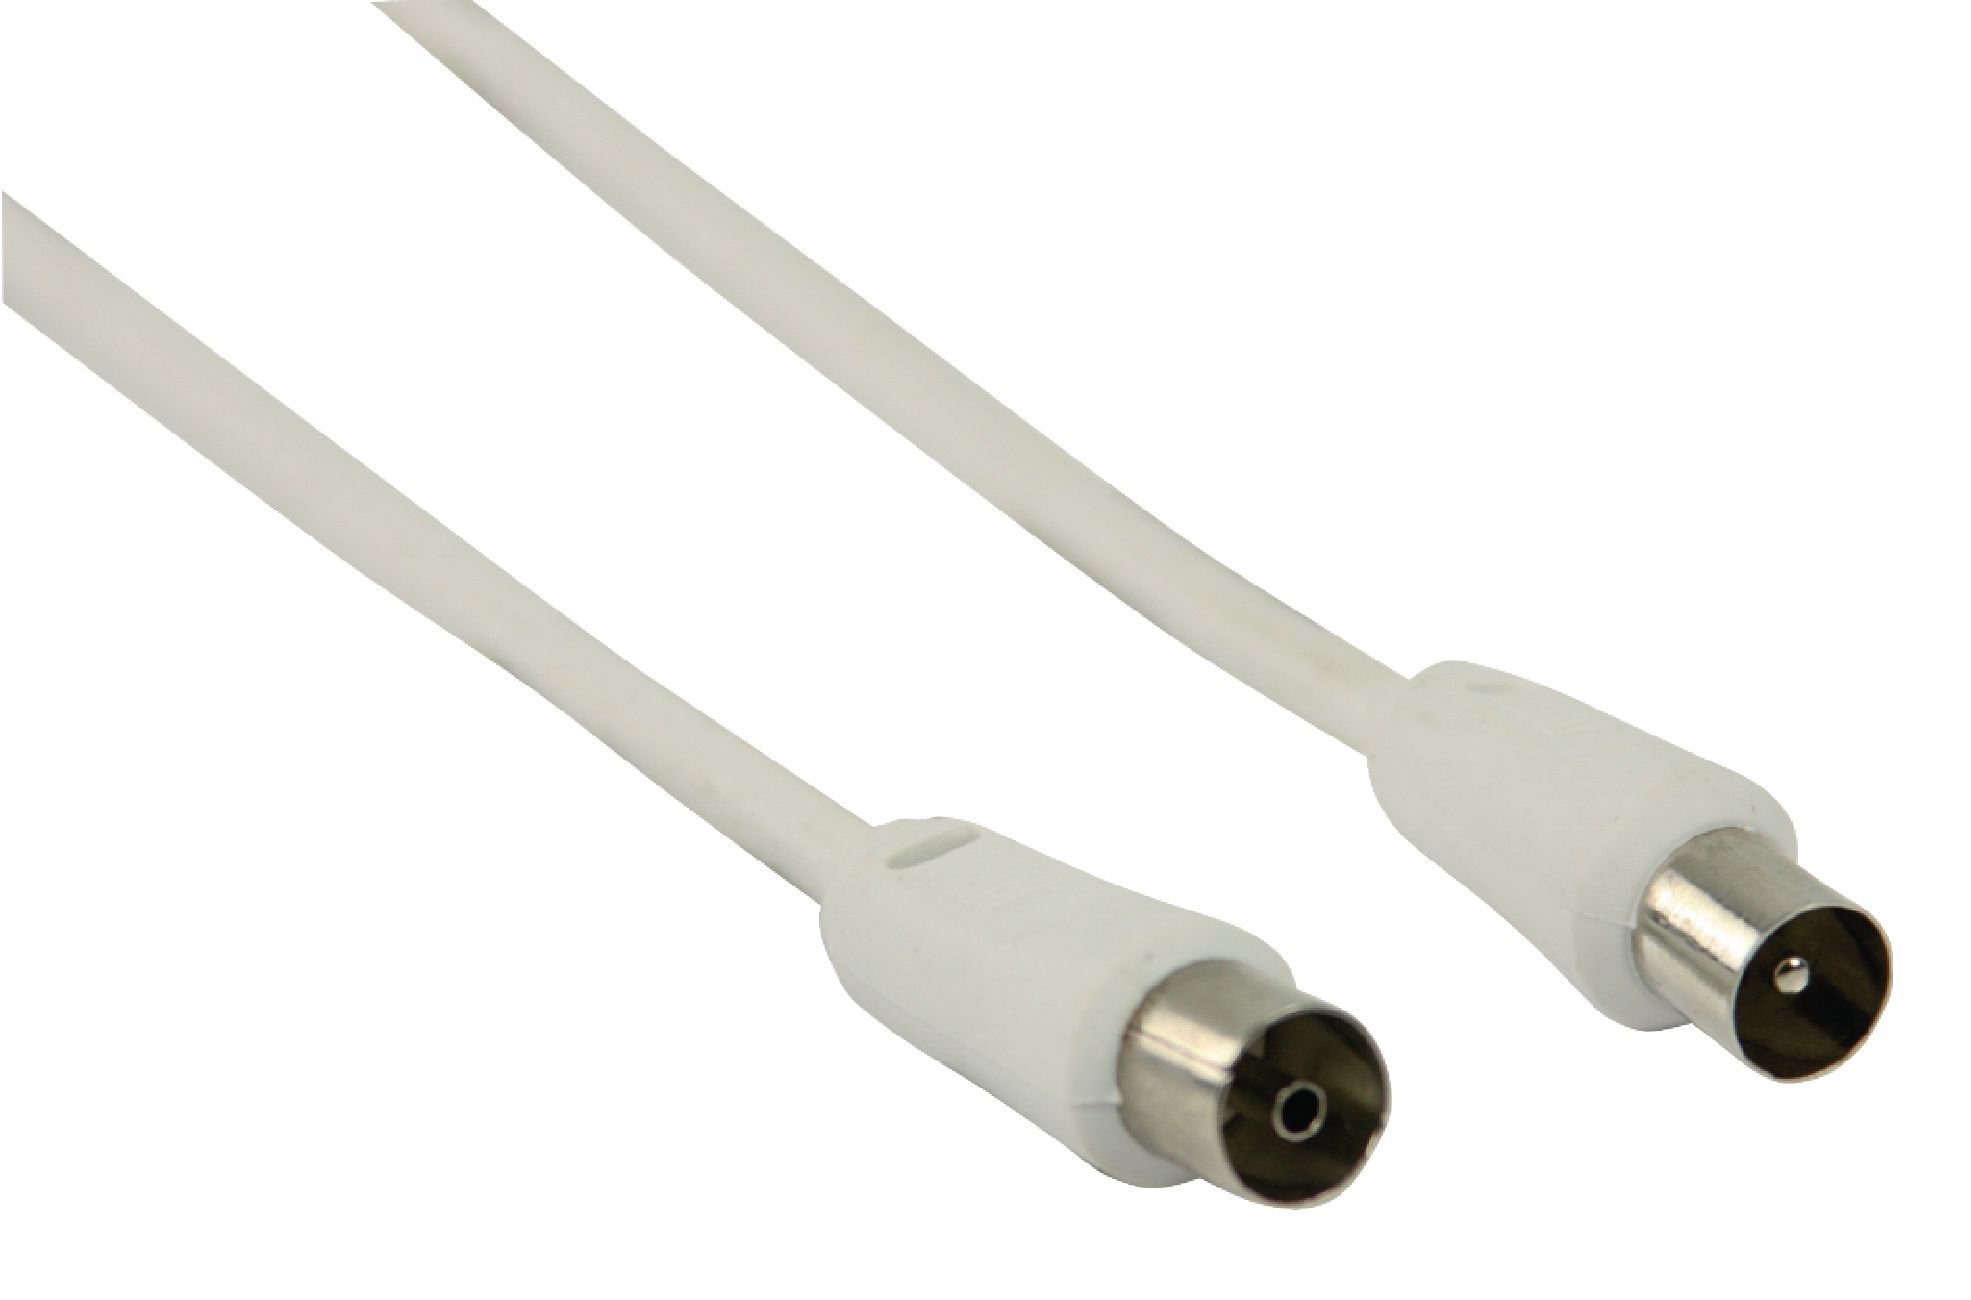 Antenna Cable